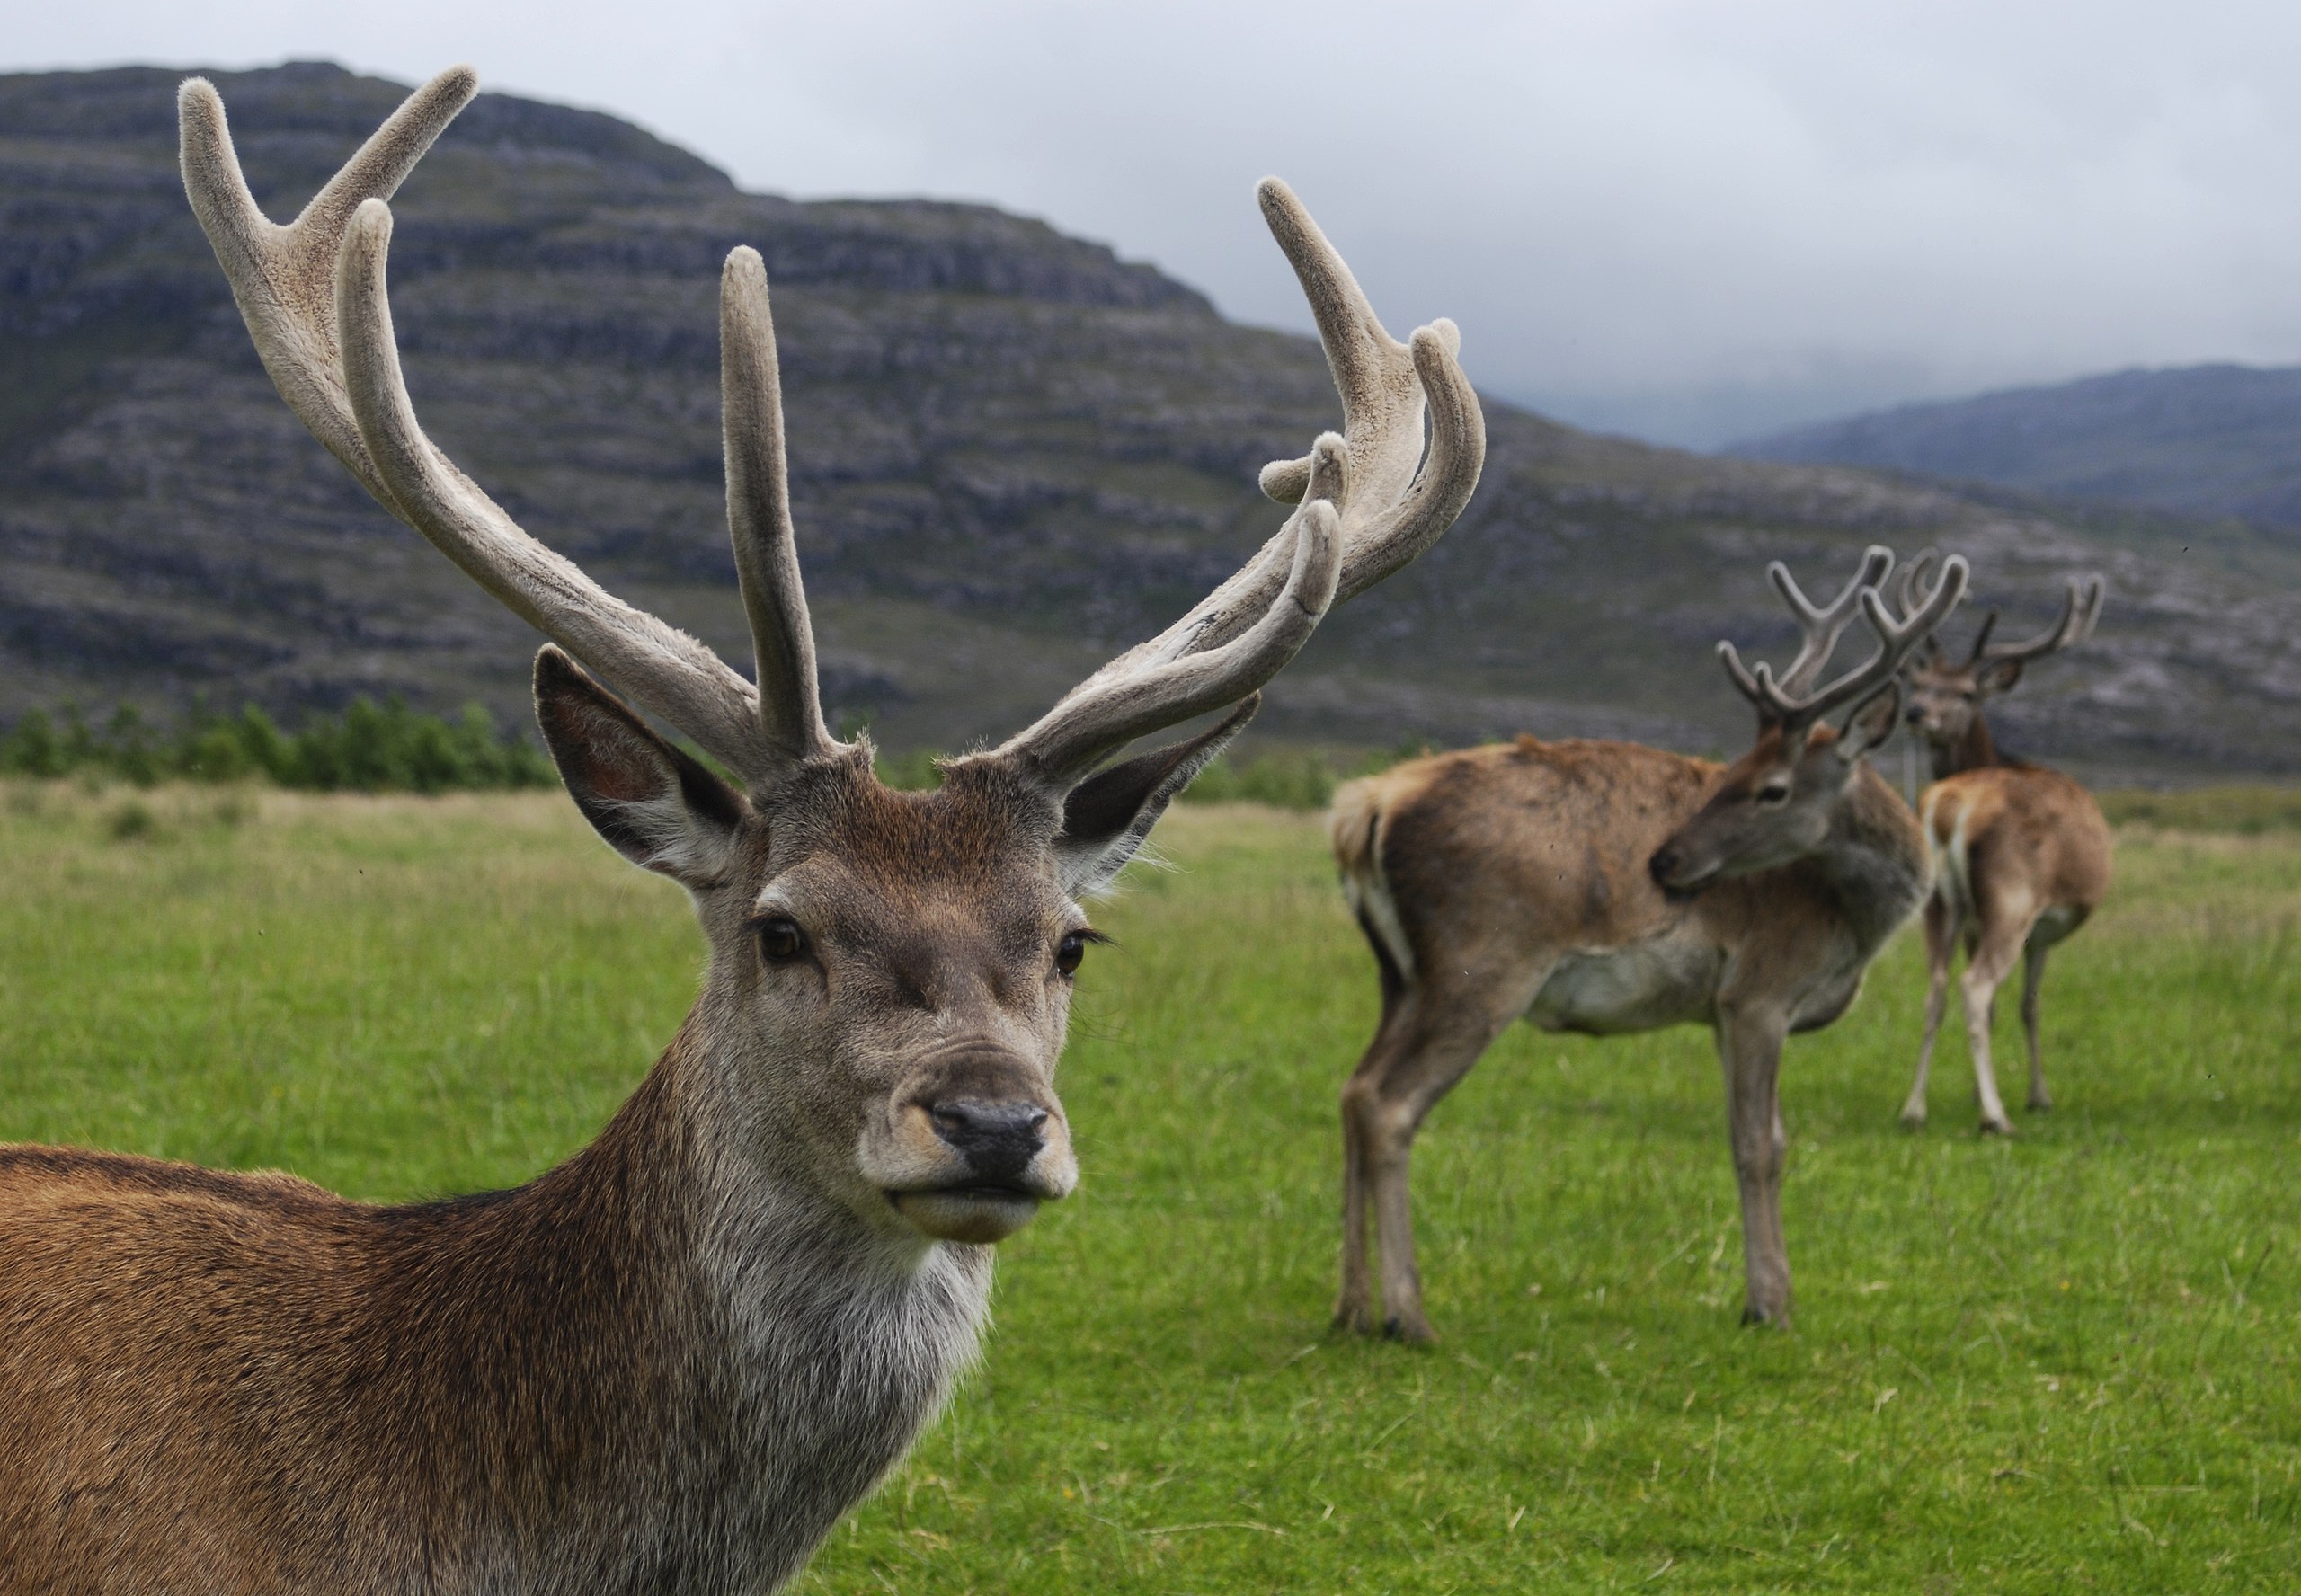 Image of three red deer stags standing in a grassy field with Scottish hills in the background.